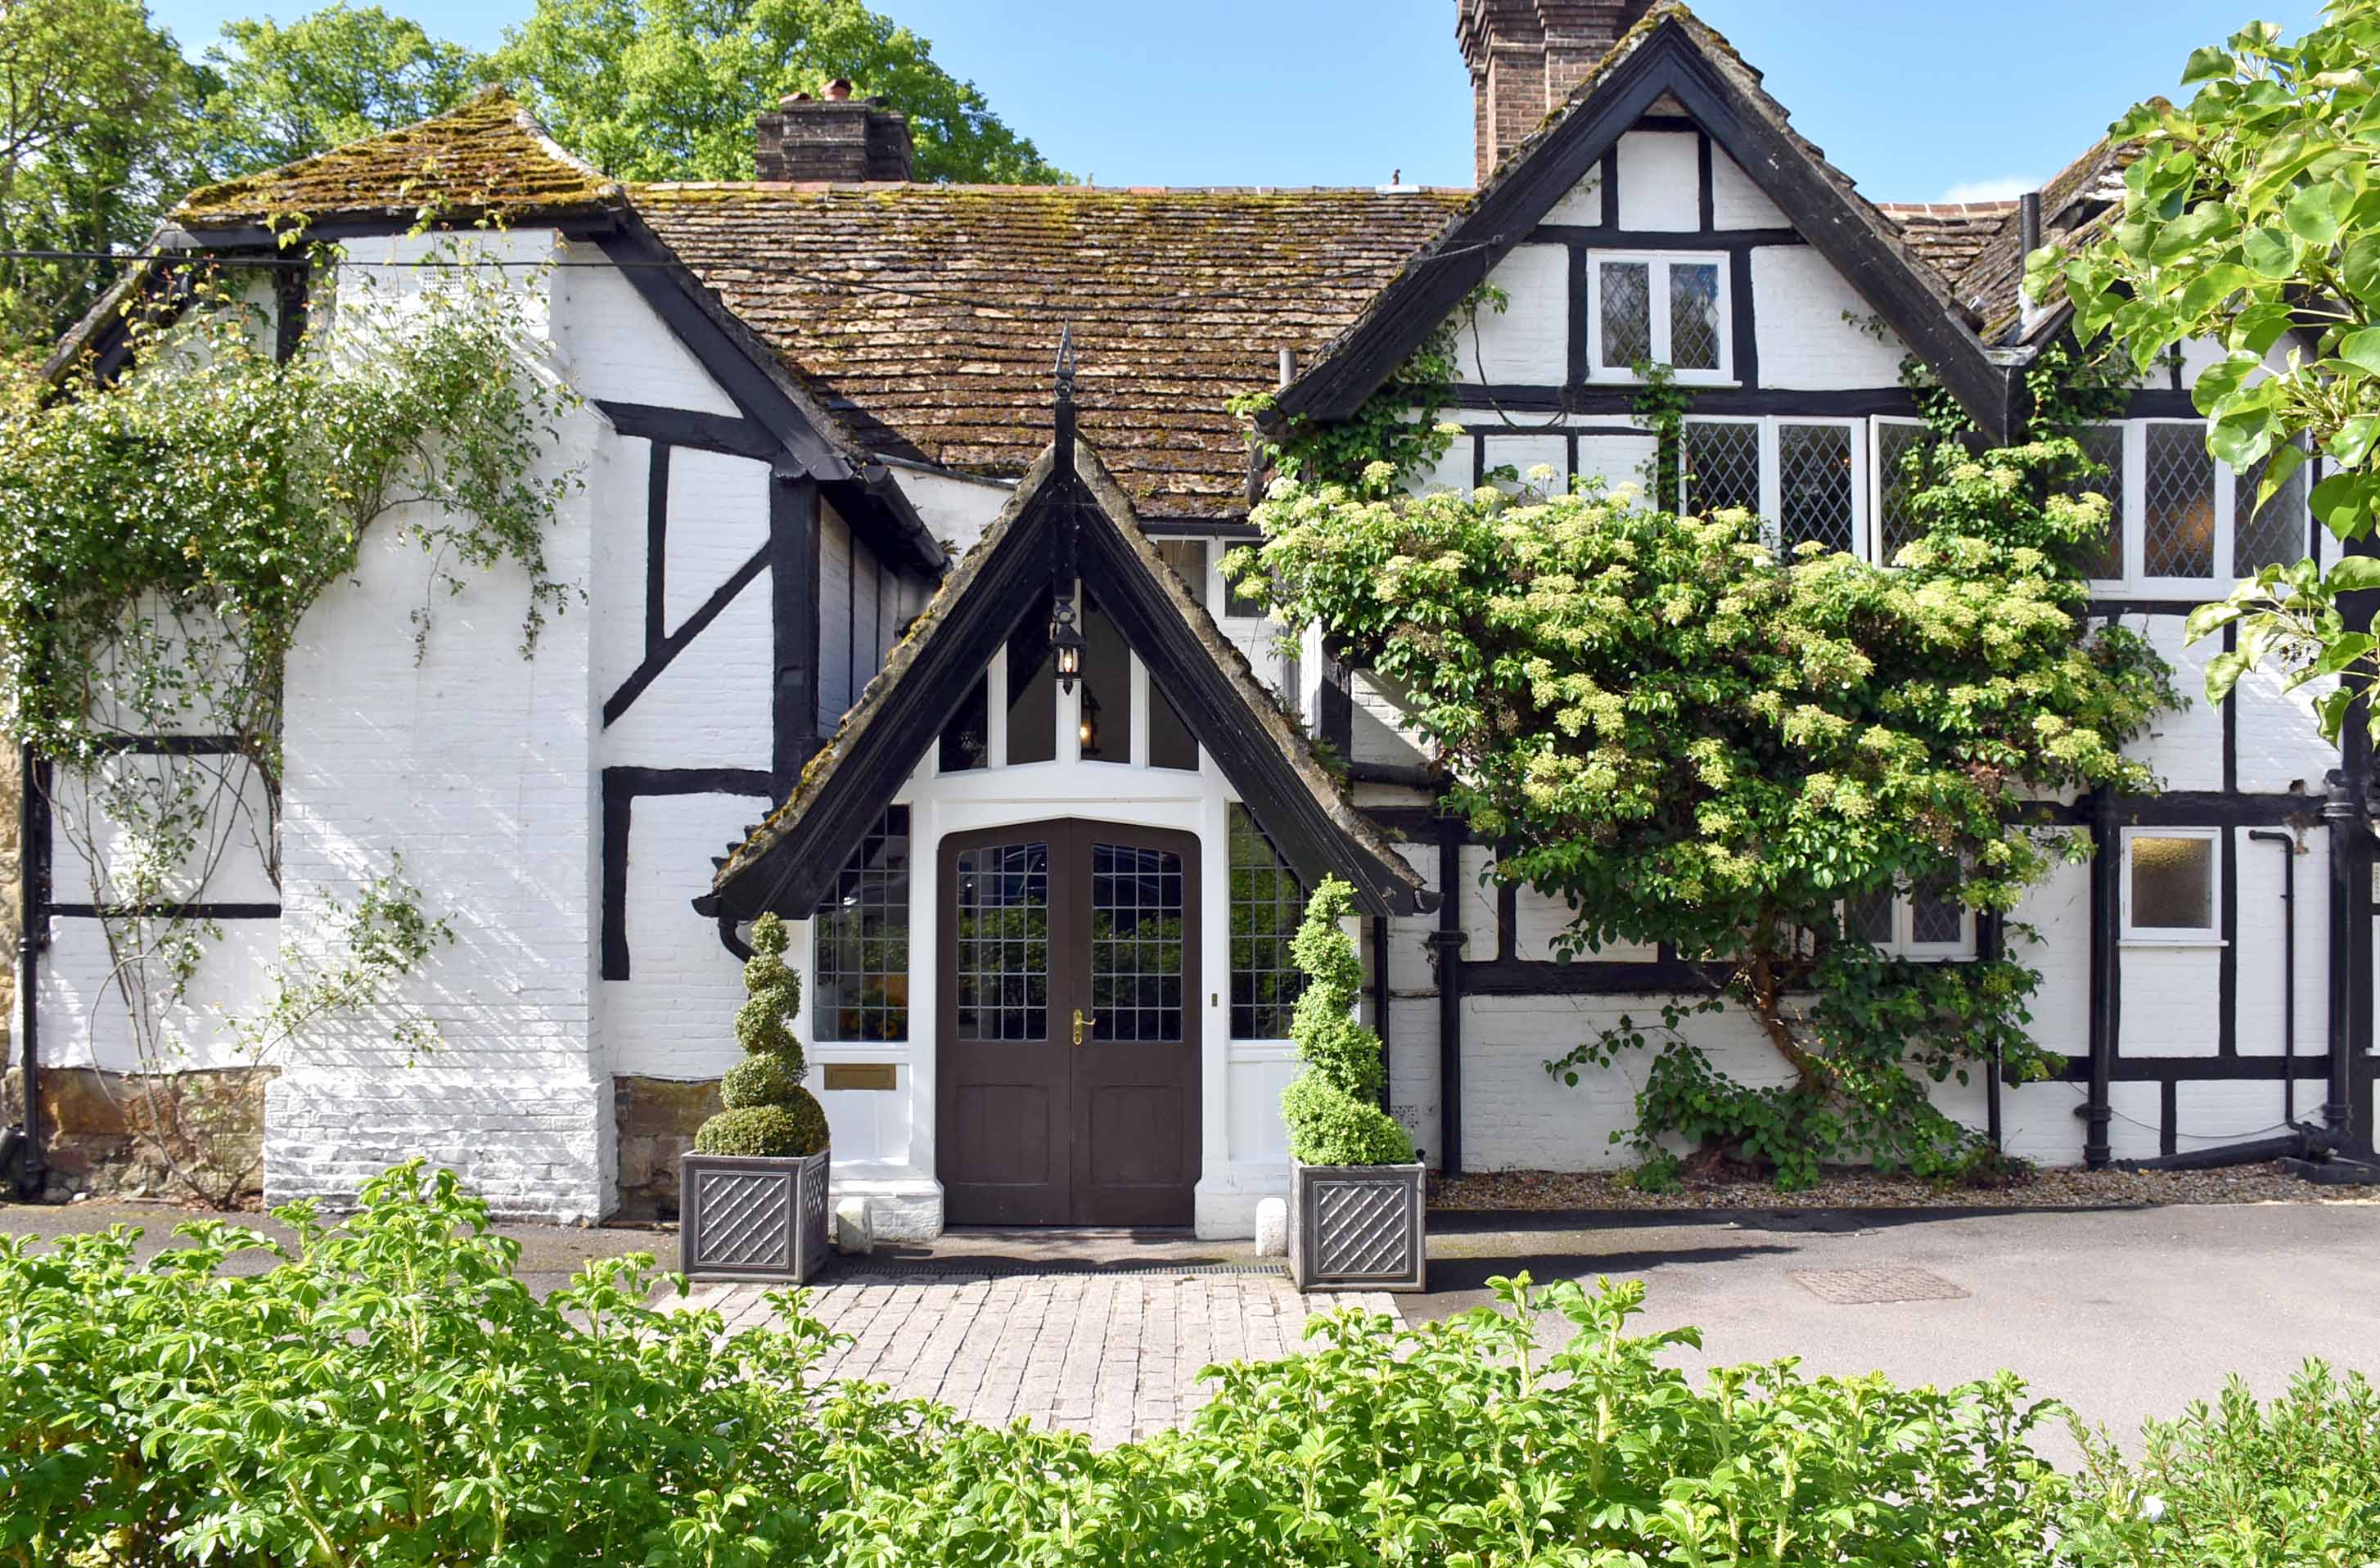 Ockenden Manor Hotel & Spa Review: A Stylish Historic Stay in Cuckfield, West Sussex